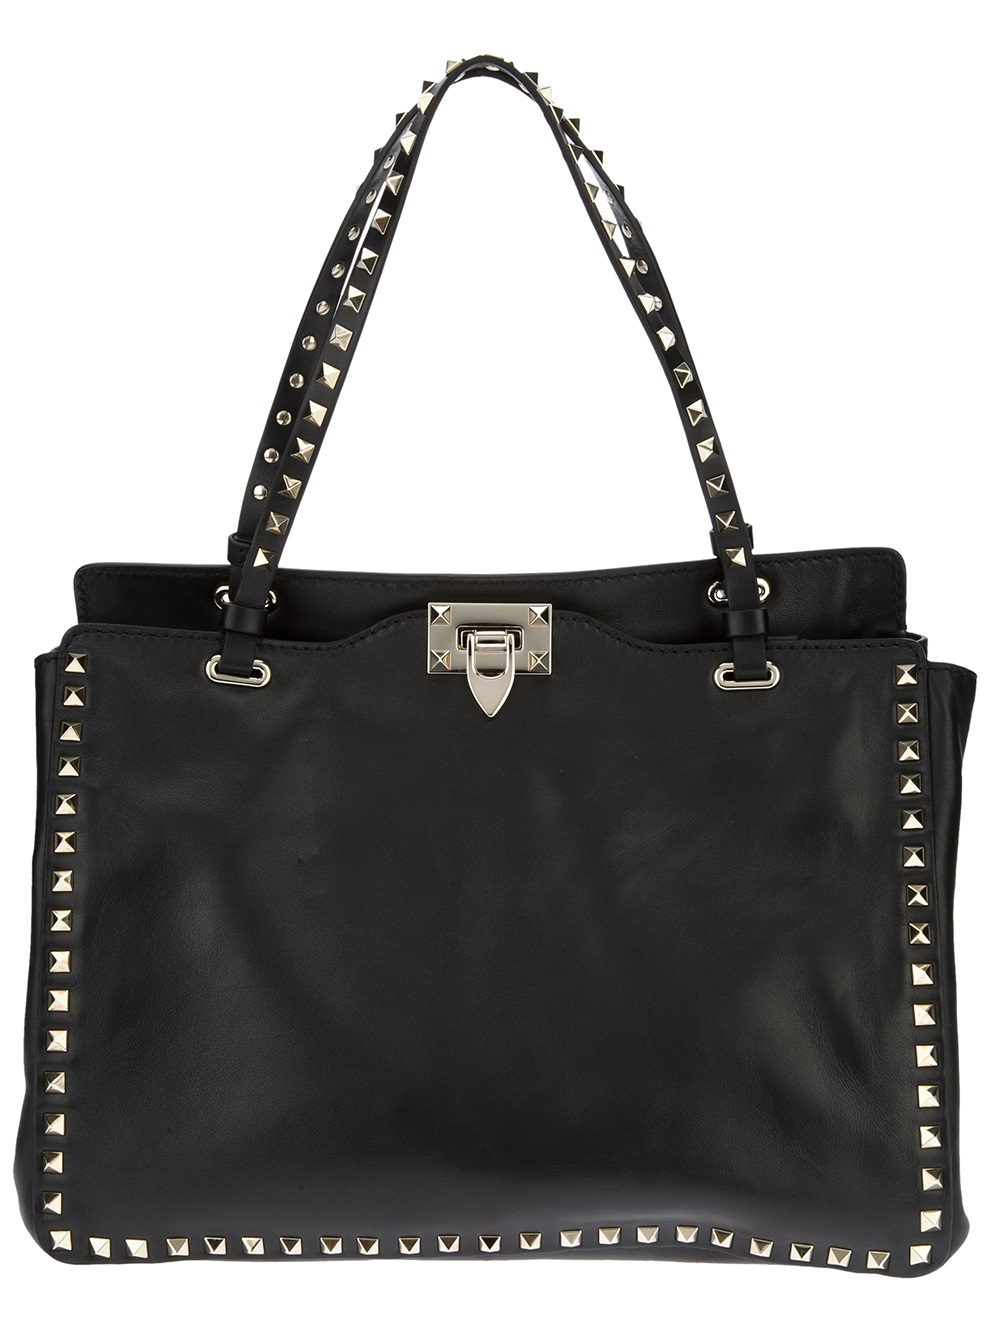 Lyst - Valentino Studded Leather Tote in Black